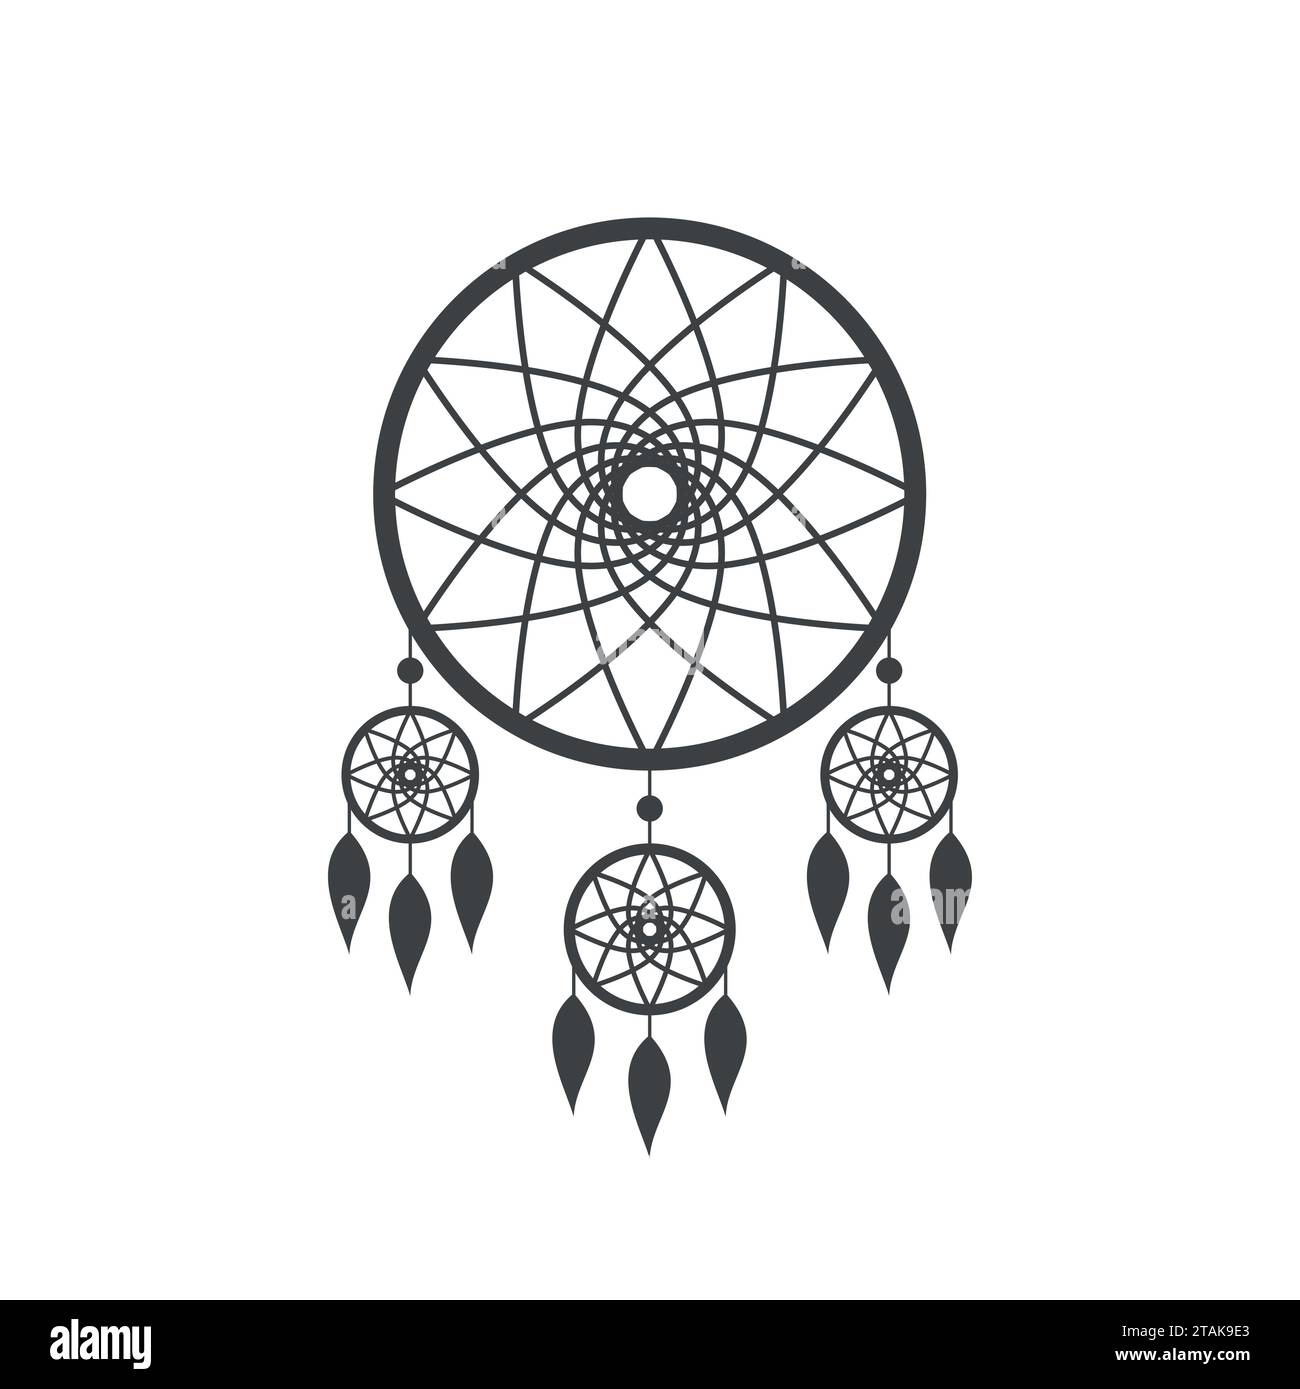 Dreamcatcher icon isolated on white background. Native american indian dream catcher icon. Vector illustration Stock Vector